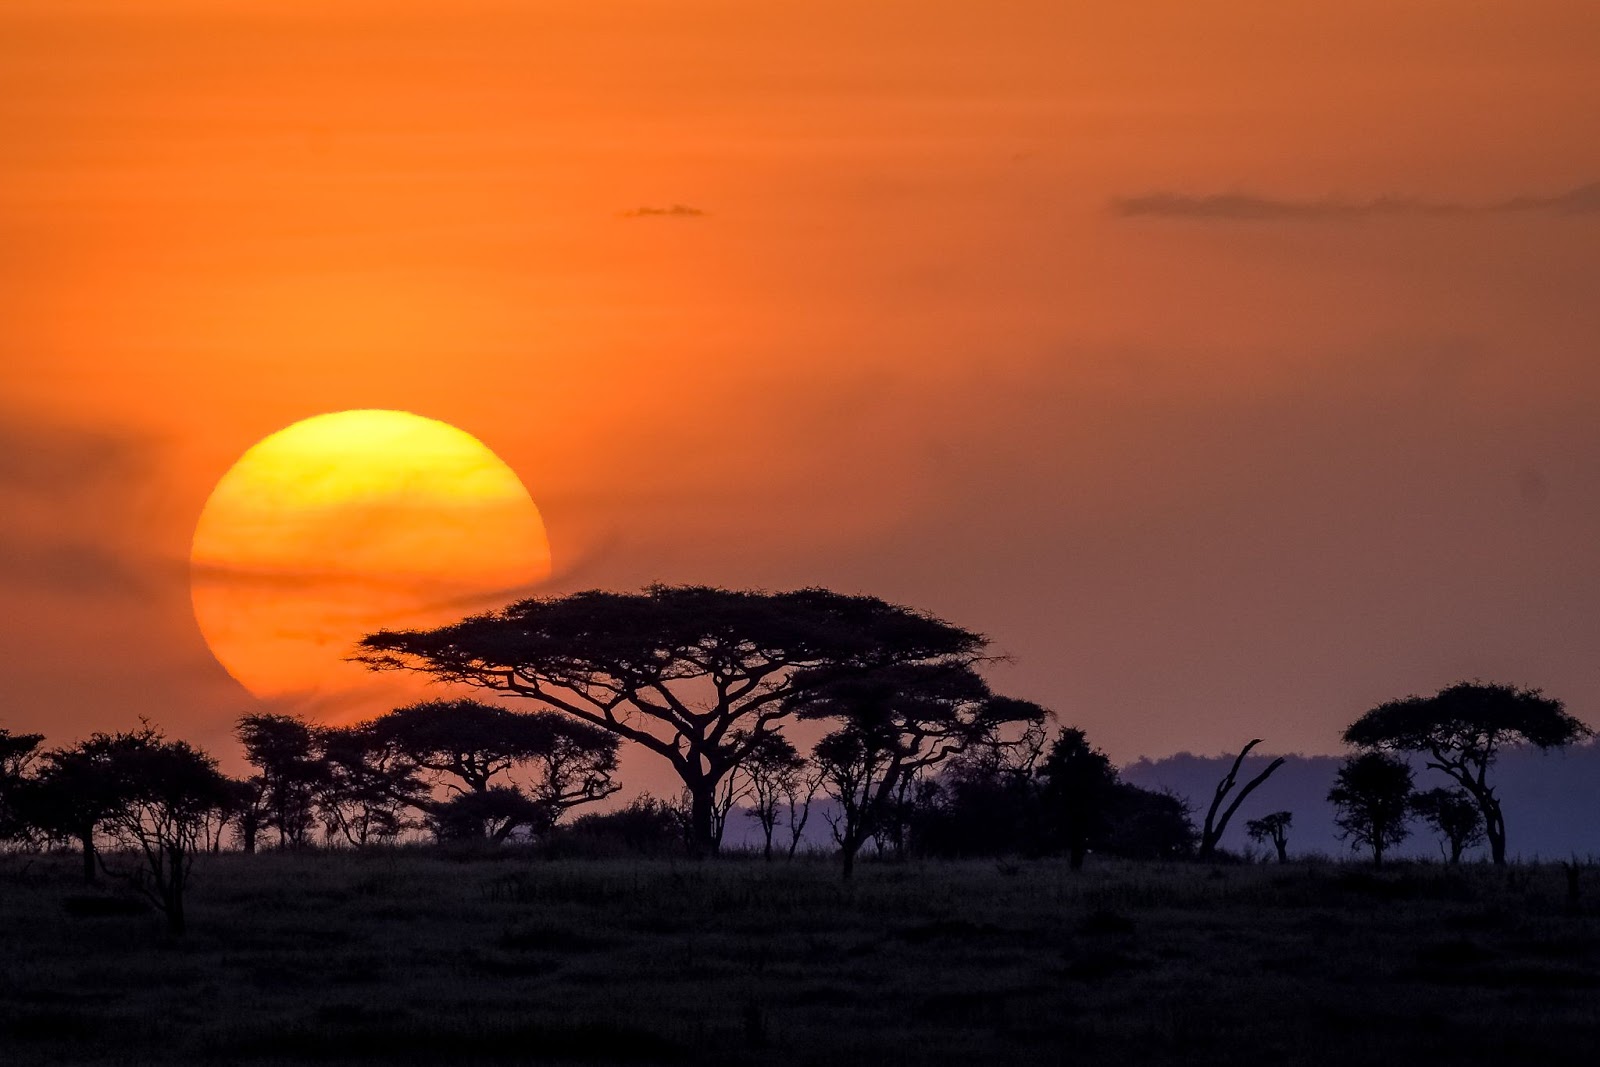 Tanzania's Serengeti park becomes Africas Leading National park by World Travel Awards